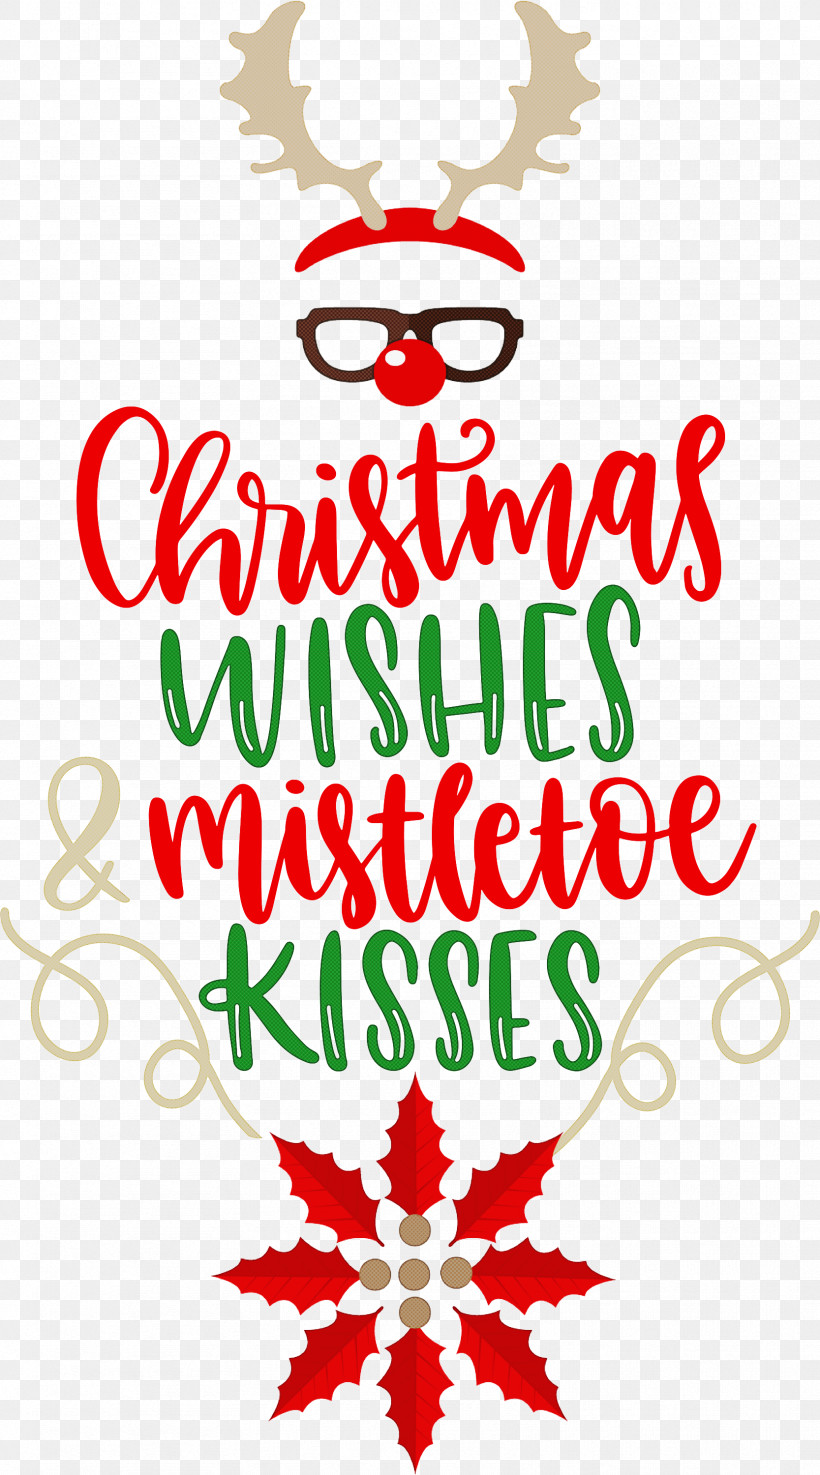 Christmas Wishes Mistletoe Kisses, PNG, 1667x3000px, Christmas Wishes, Christmas Day, Christmas Ornament, Christmas Ornament M, Christmas Tree Download Free